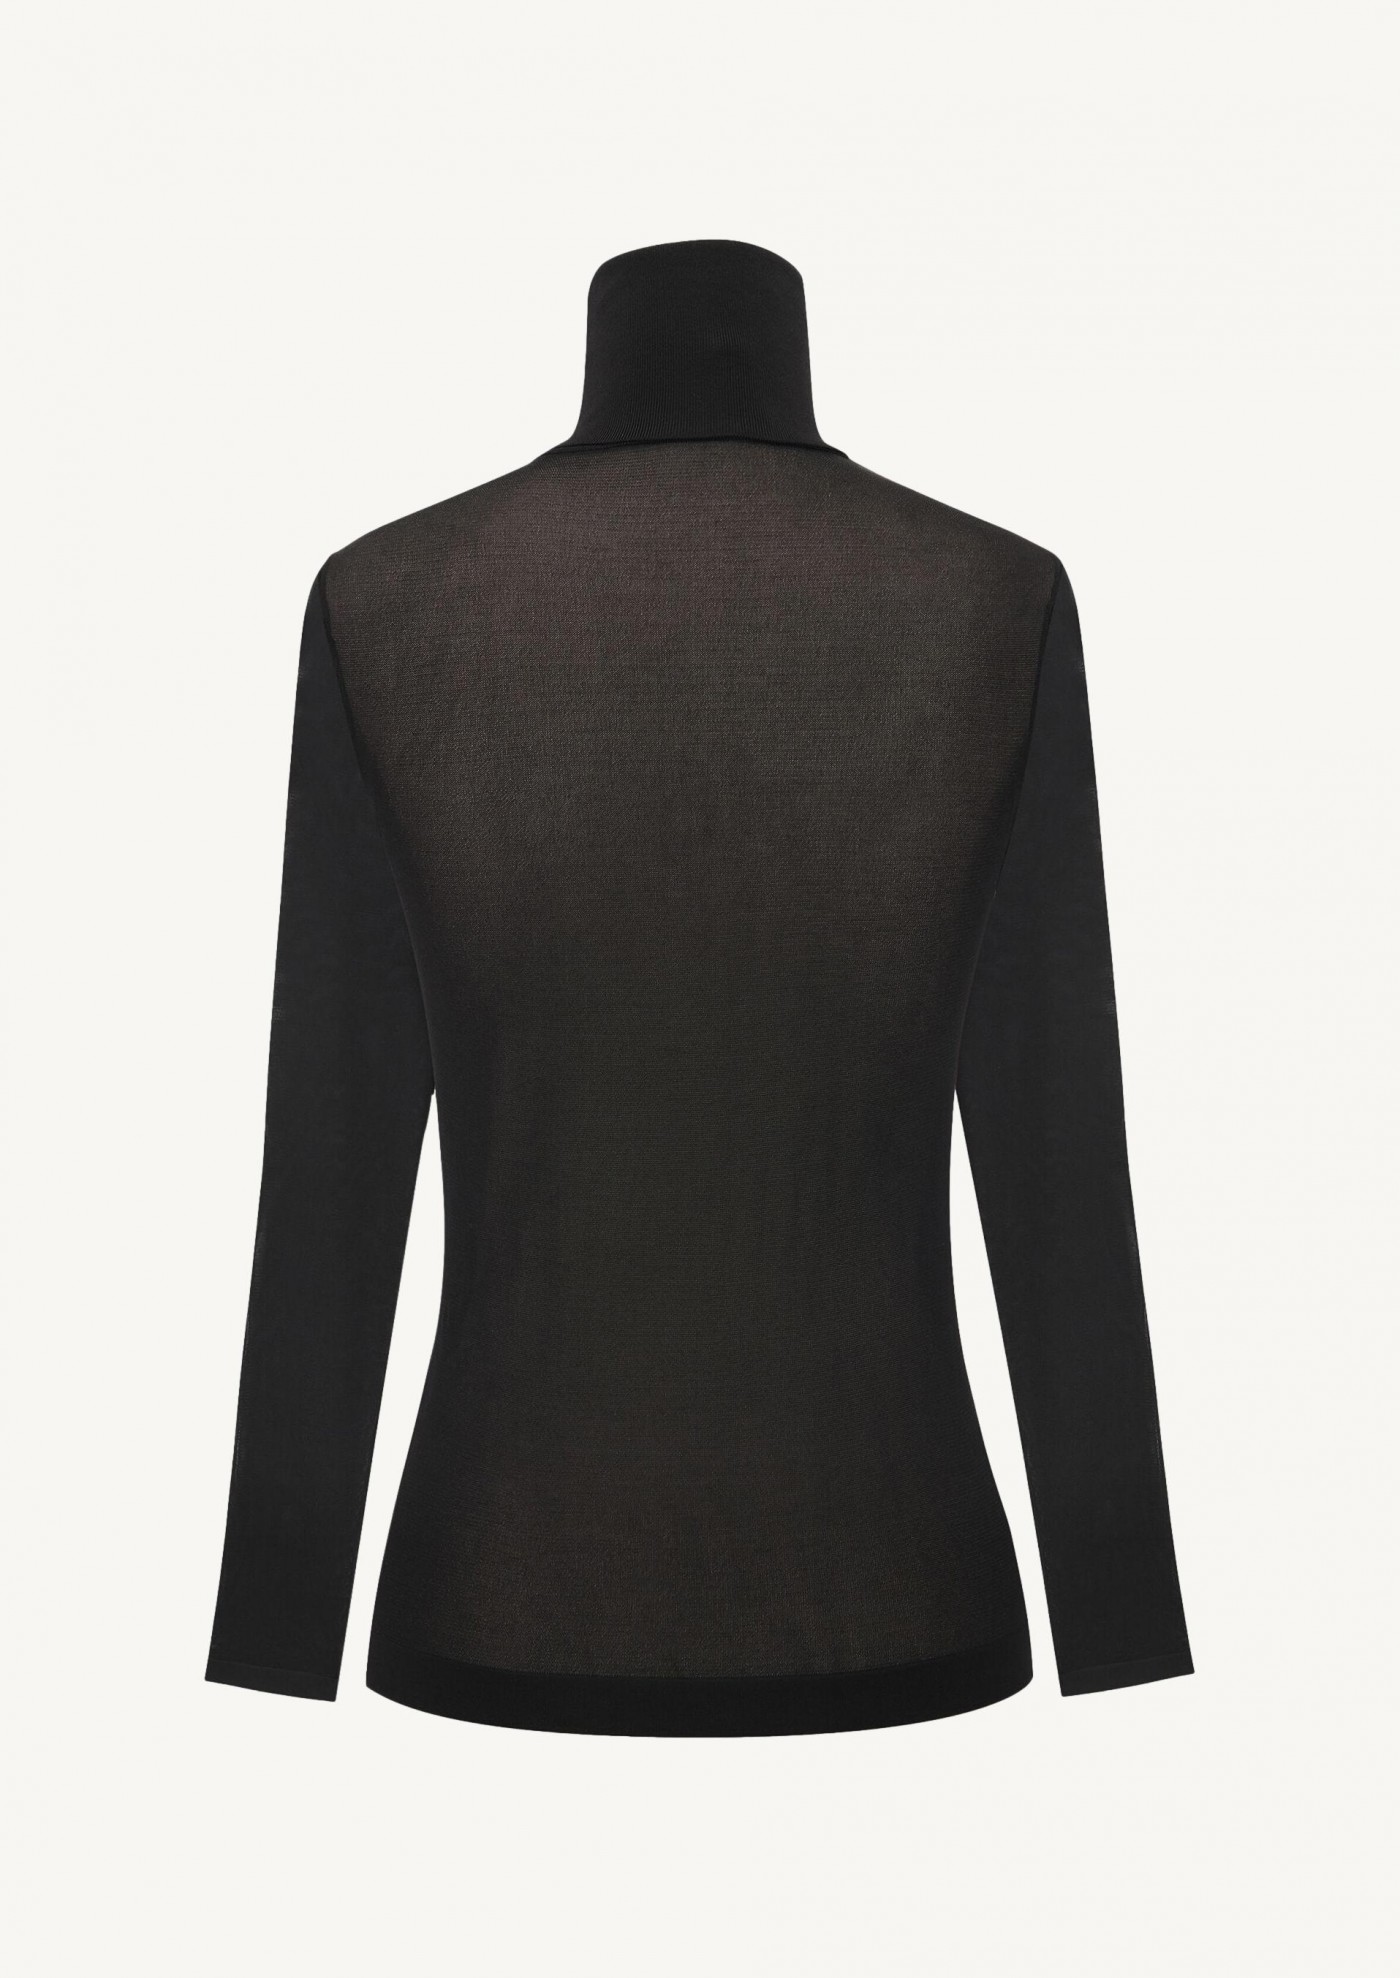 Roll-neck long-sleeved top